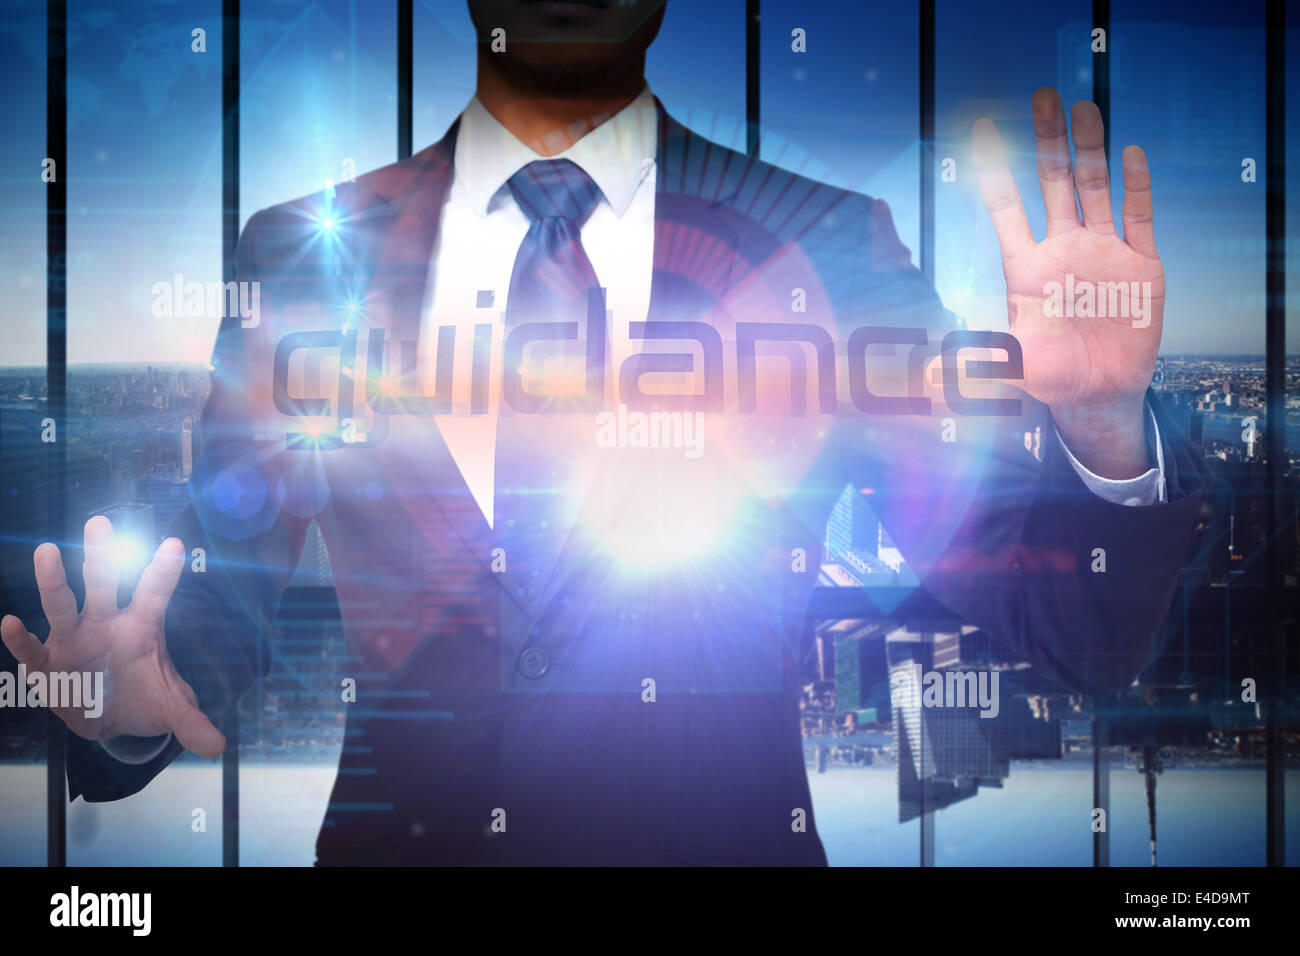 Businessman presenting the word guidance Stock Photo